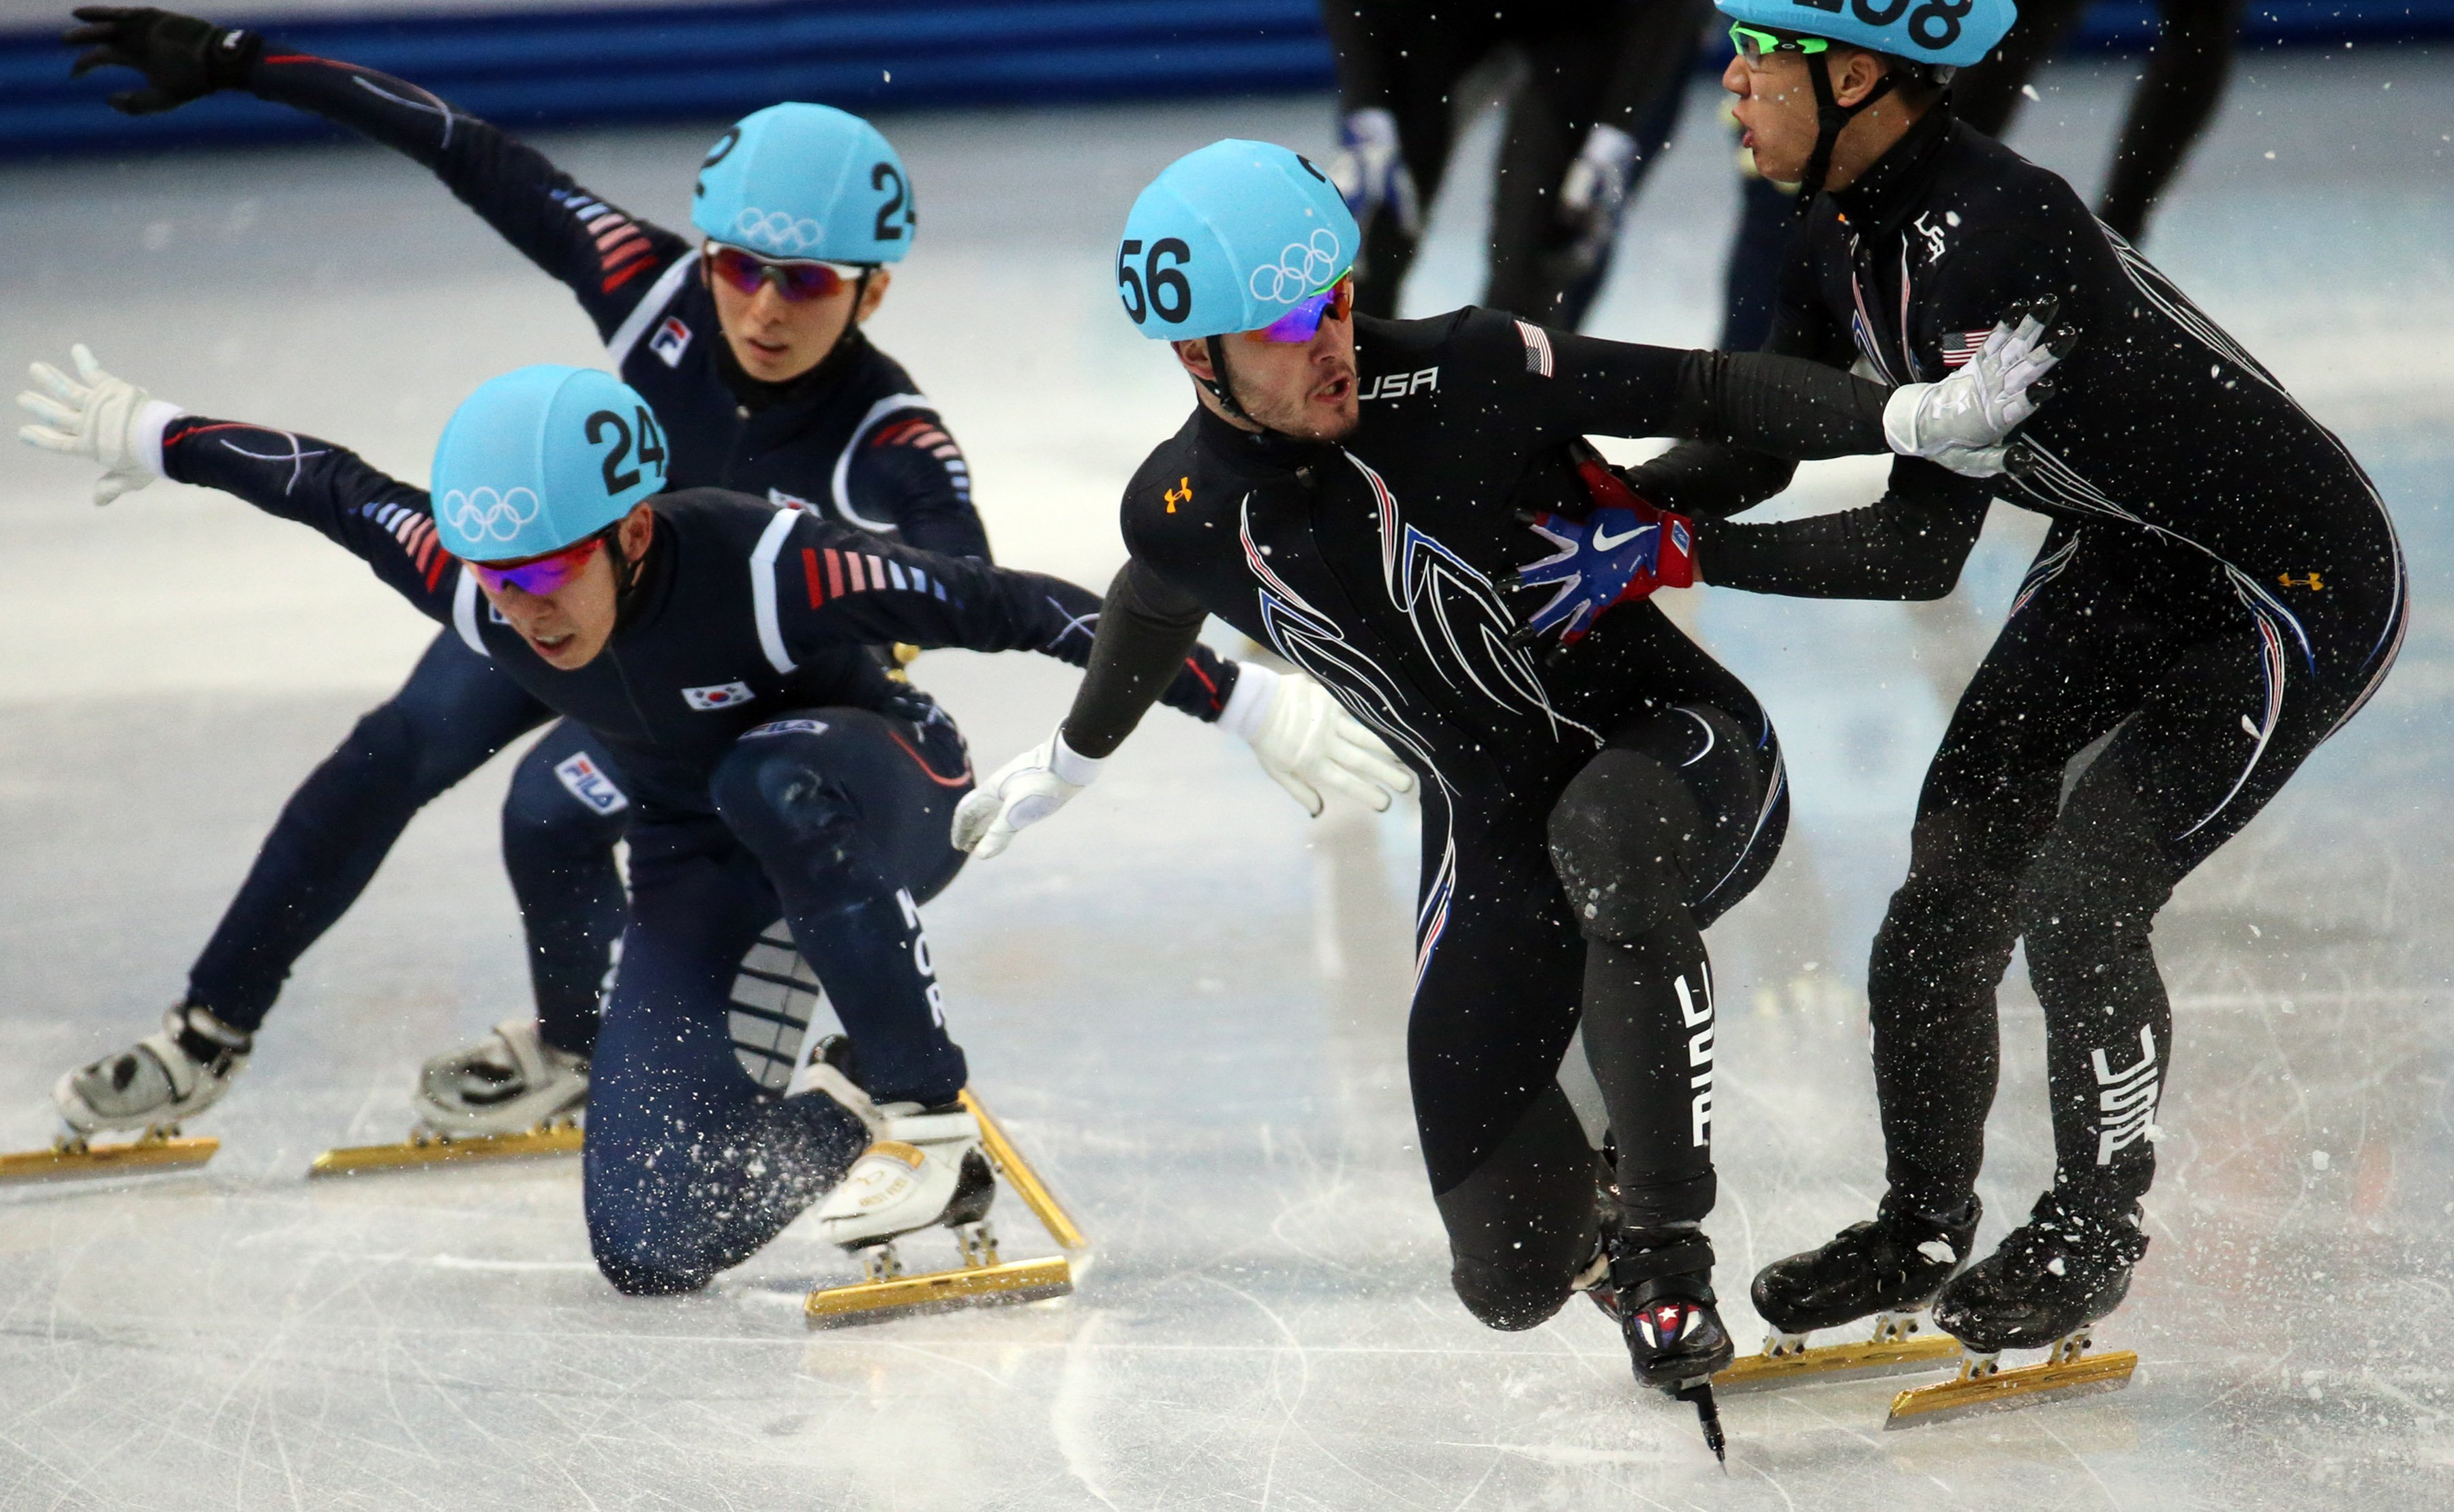 USA's J.R. Celski (258) tries to pick up teammate Eduardo Alvarez (256) after a collision with the Korean team in a semifinal of the men's 5000m short track speed skating relay.